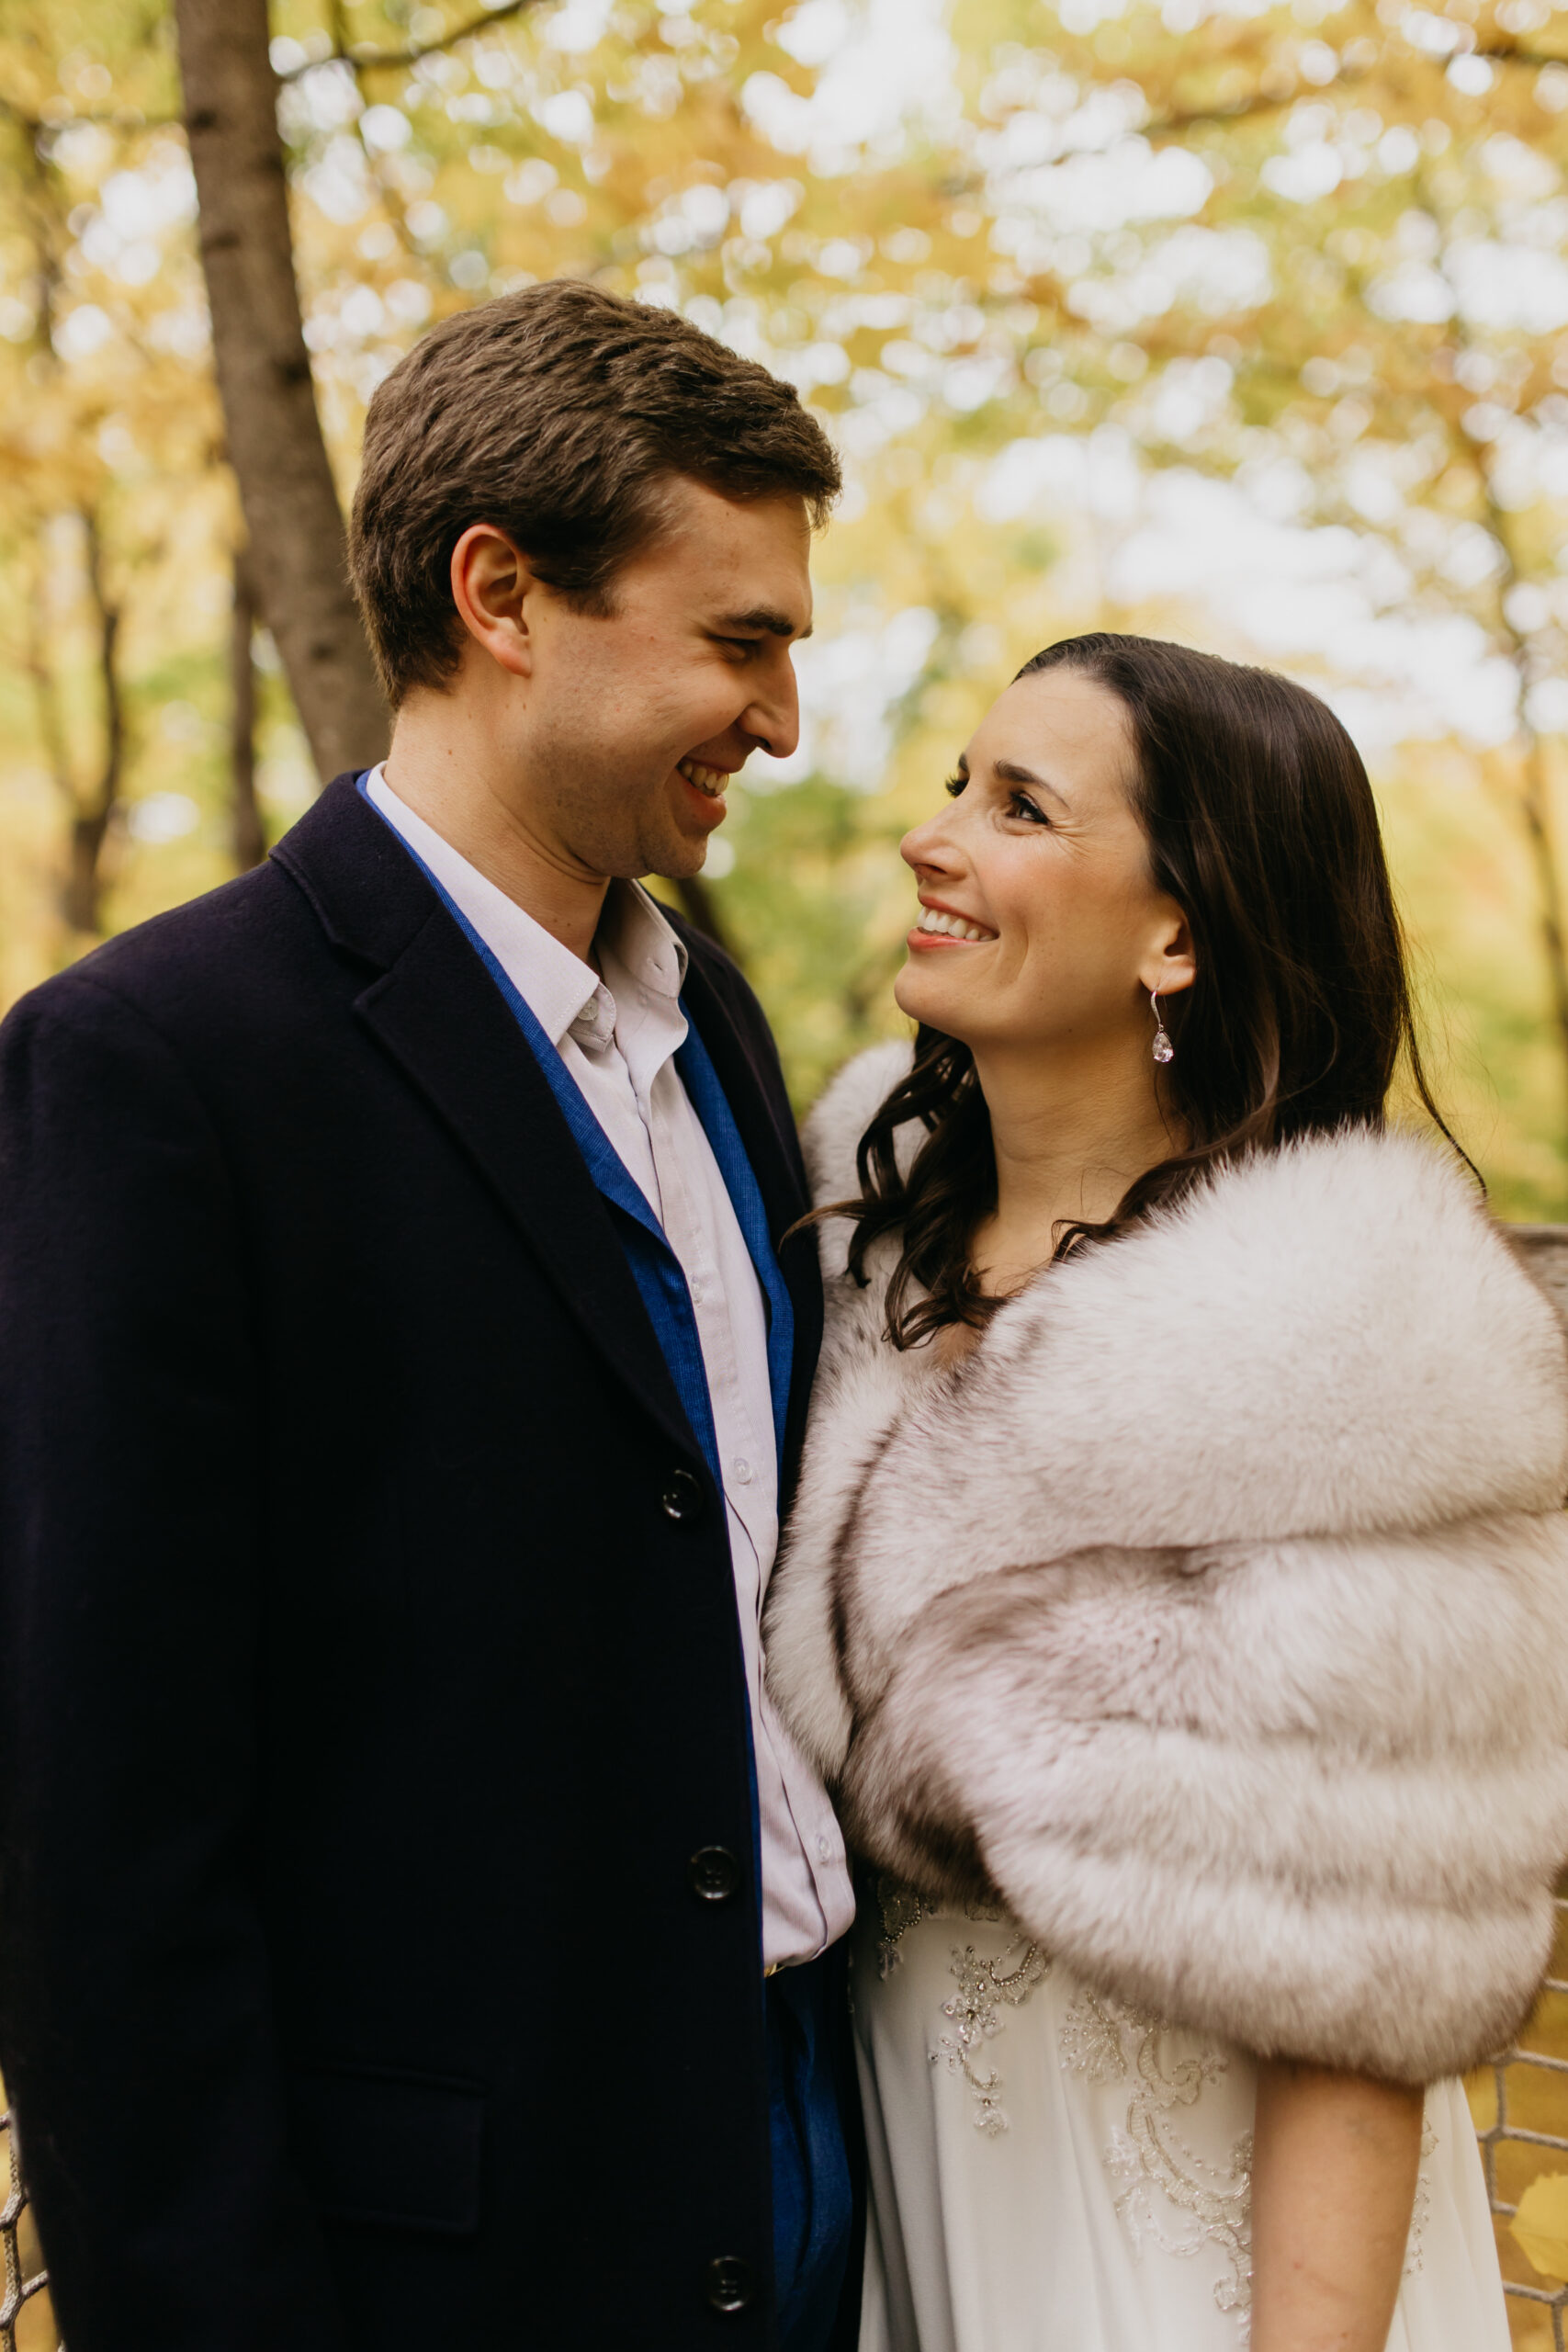 A lovely couple lovingly glances at each other in a fall shoot